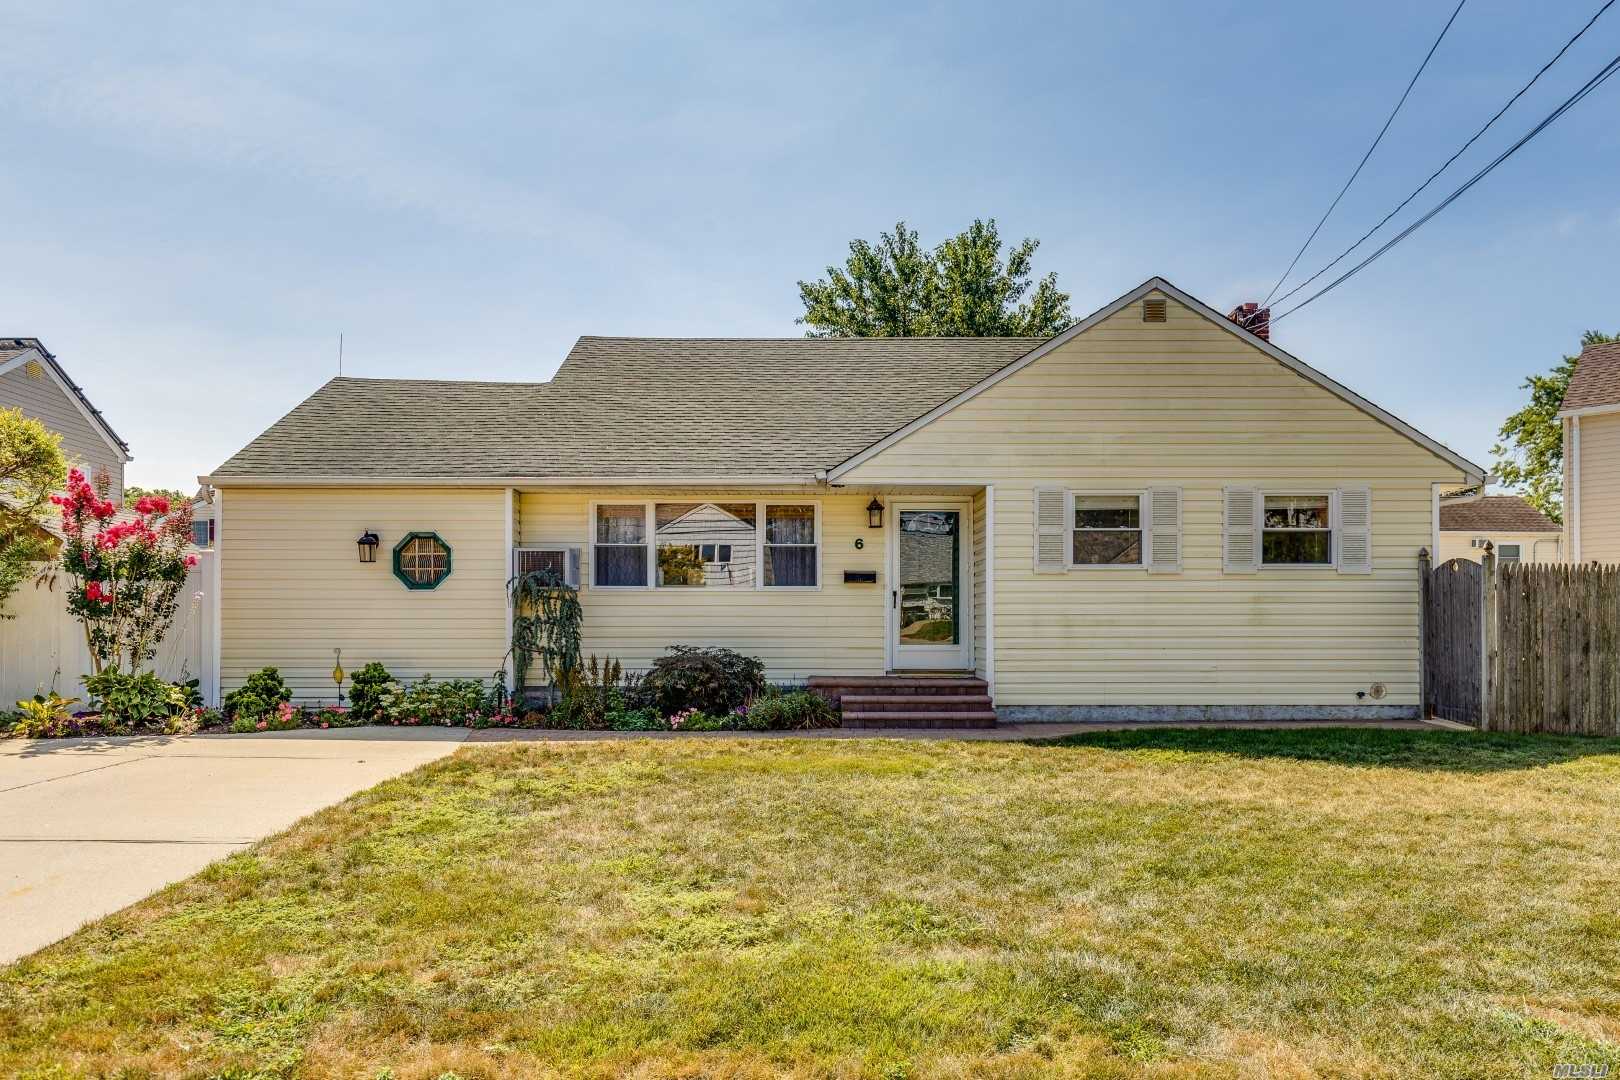 Meticulously Maintained 3 Bedroom, 2 Bath Front To Back Split Located In Massapequa Park! Move Right Into This Light And Bright Home W/Hardwood Floors & Tremendous Family Room W/ Bonus Room. Gas Heat & New Hot Water Heater, Updated Electric, Gas Cooking, Attic Storage, Cac, In-Ground Sprinklers,  Private Yard W/Pvc Fence & Patio